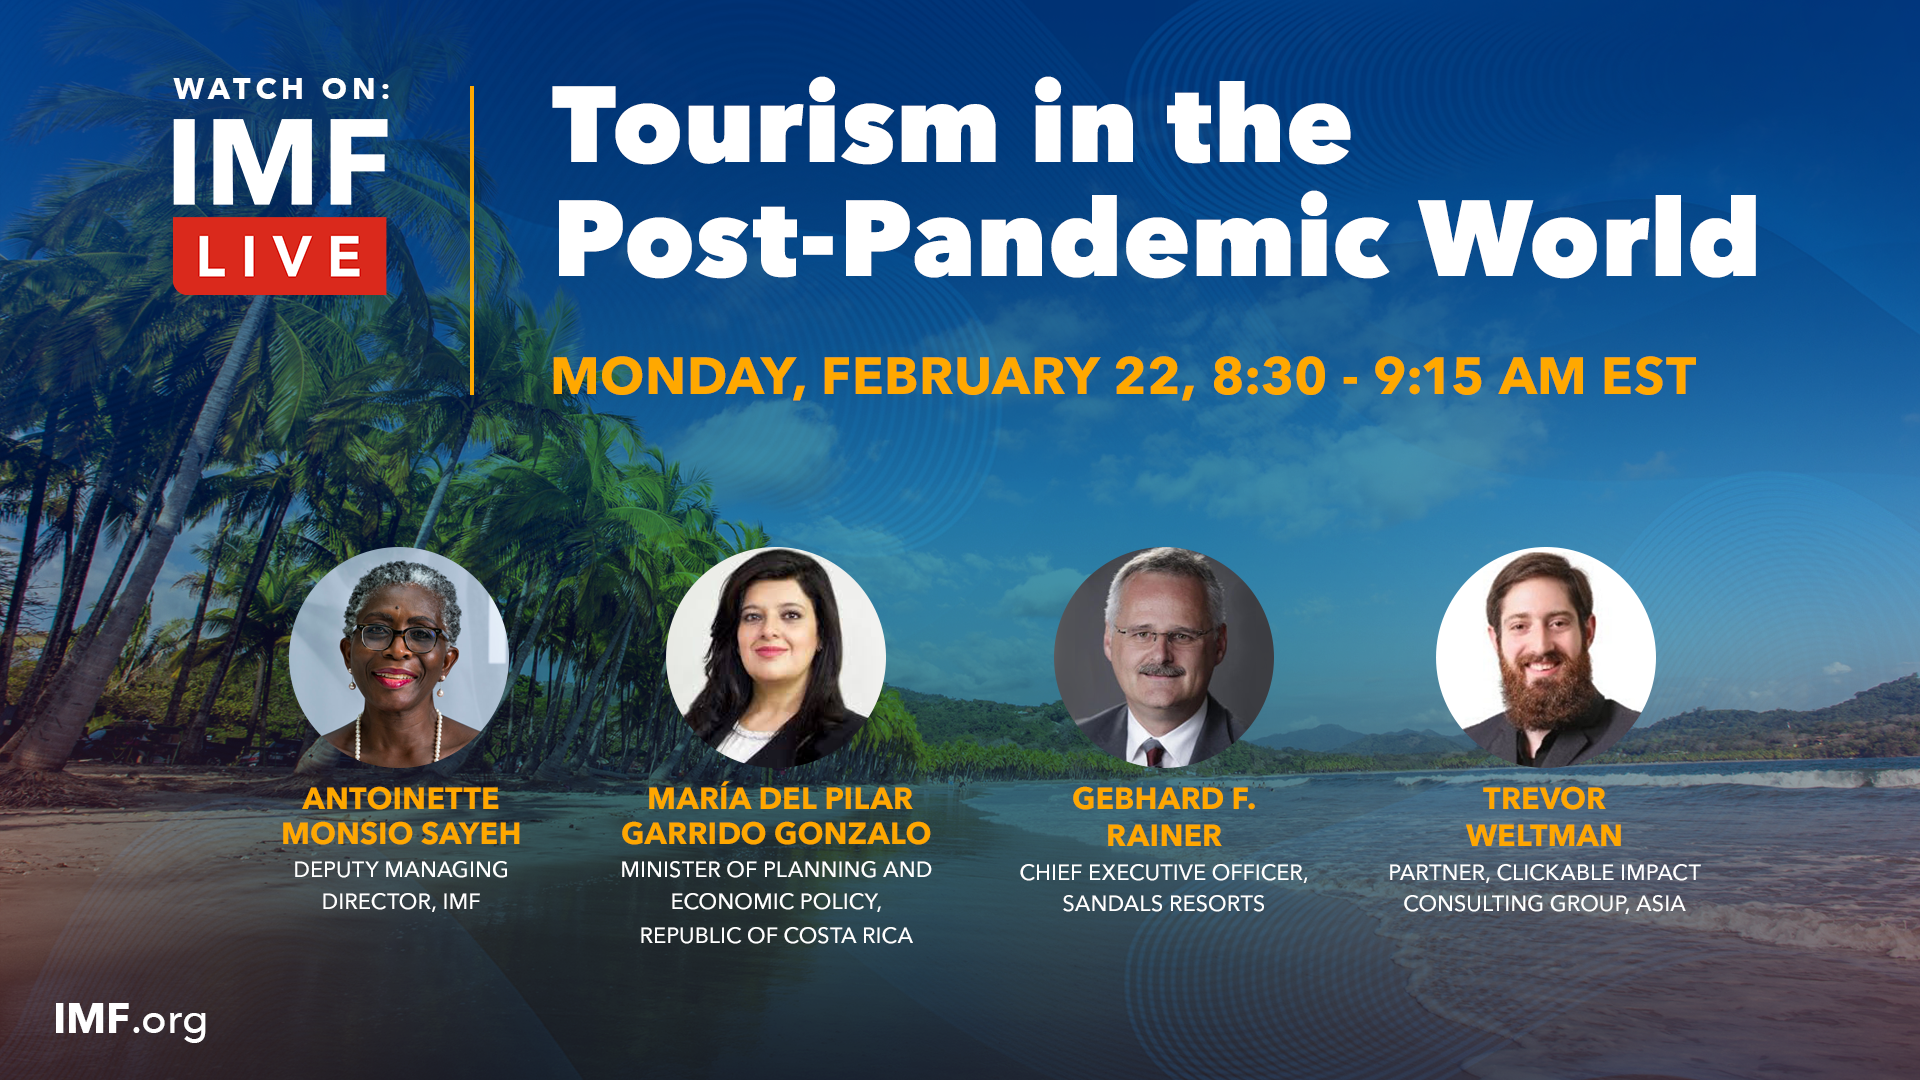 Tourism in the Post-Pandemic World